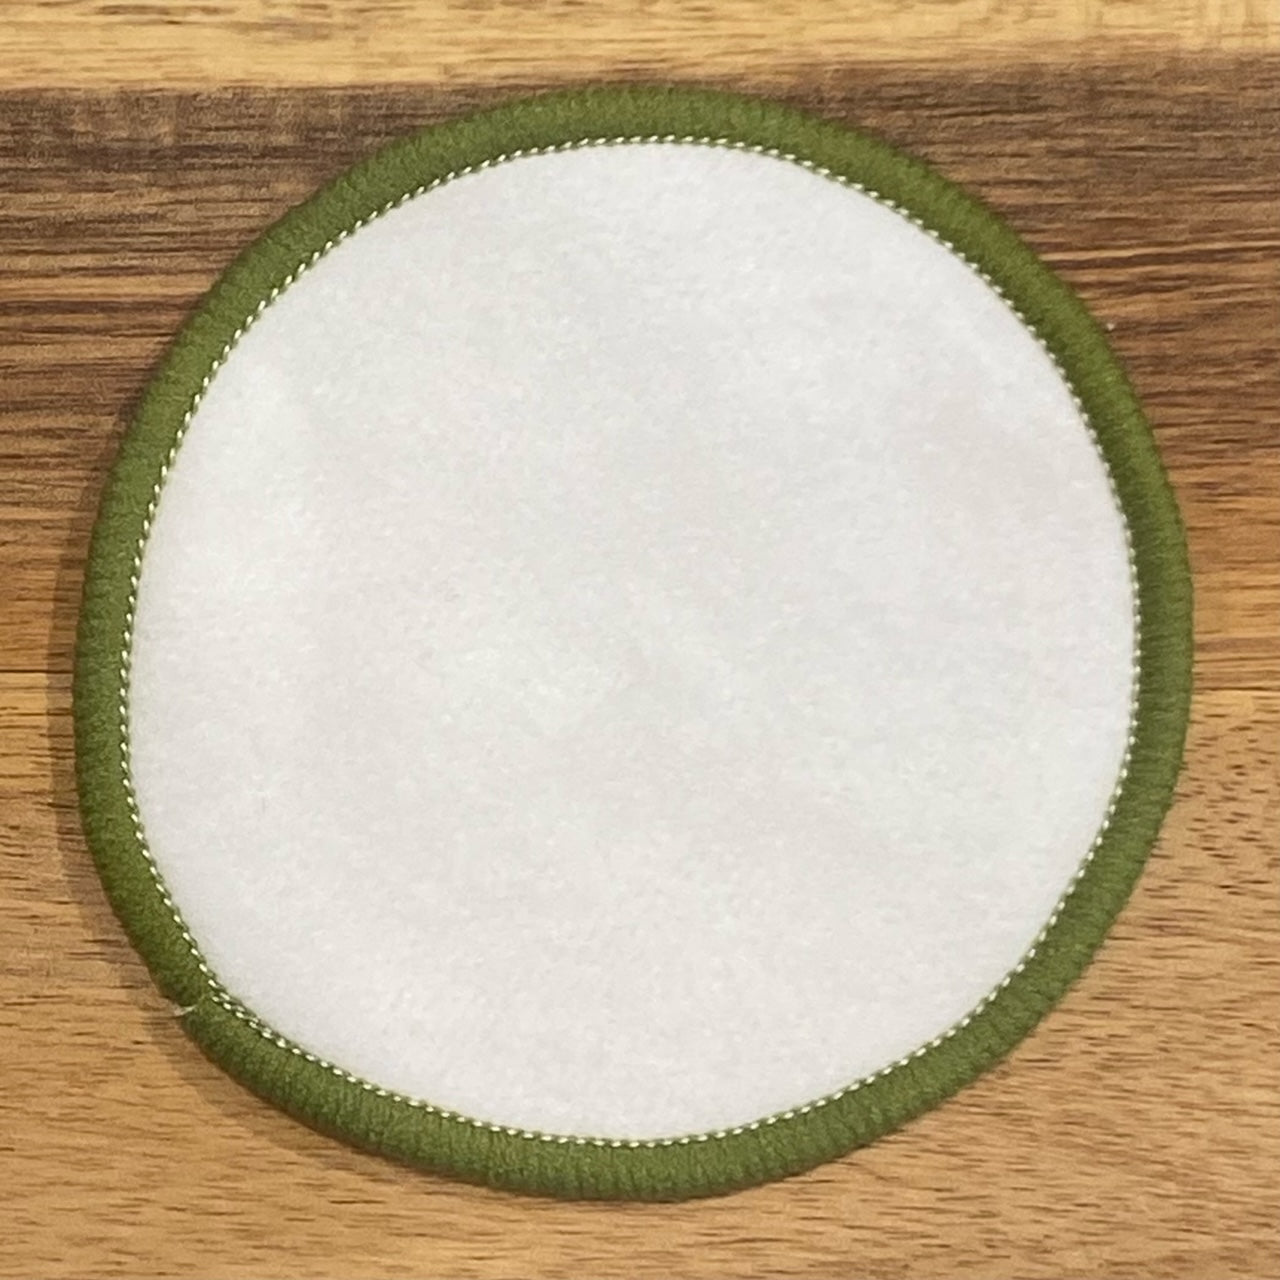 Reusable Makeup Pad Remover - Cotton - White/Green - Off the Bottle Refill Shop